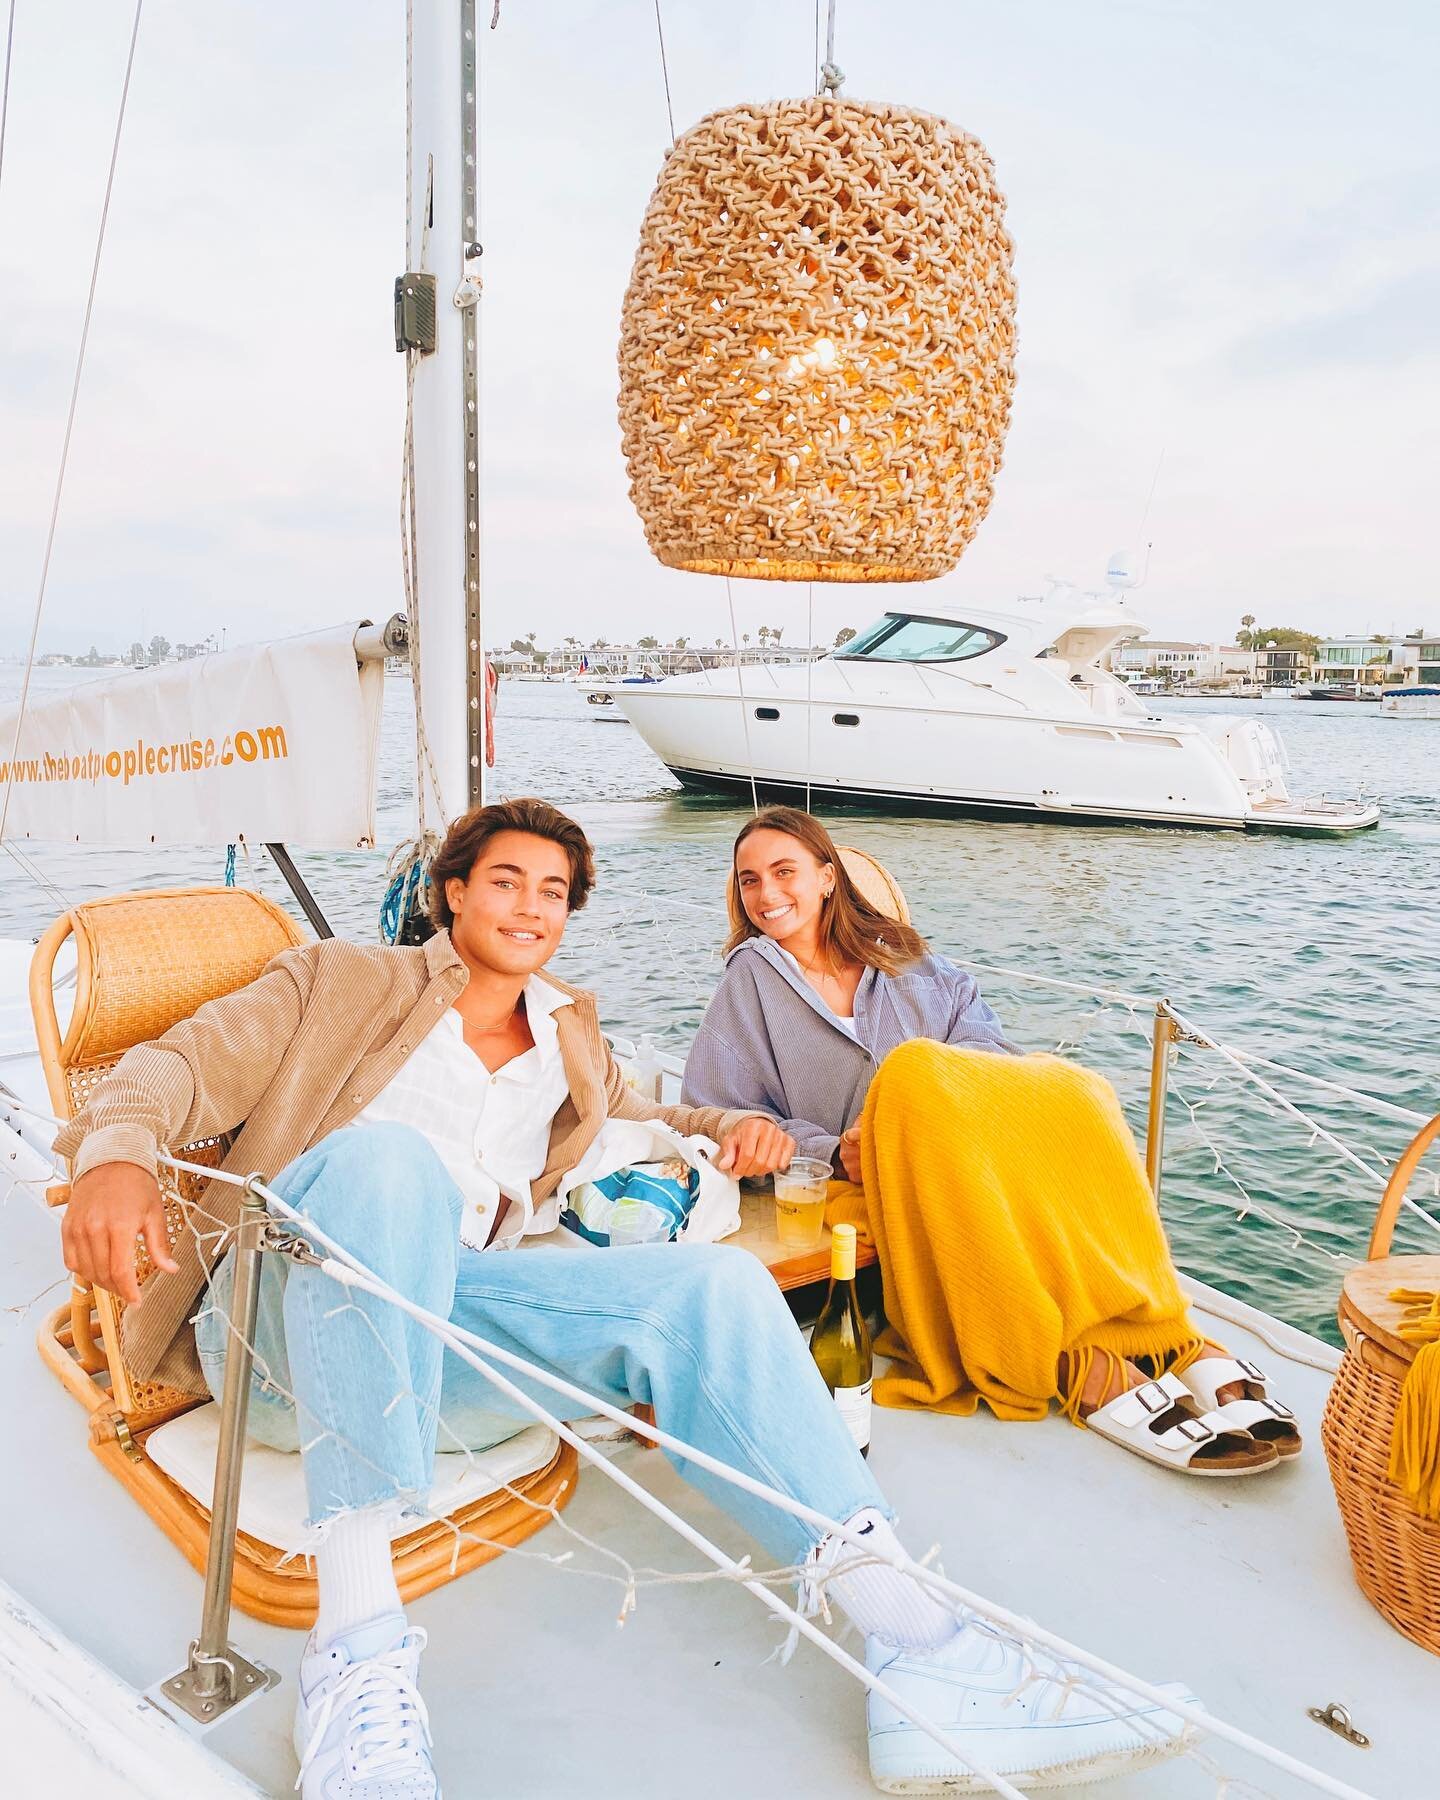 Surprise your date with a romantic cruise around Newport Harbor! Book your cruise now at www.theboatpeoplecruise.com #boatcruise #newportbeachca #sunsetcruise #datenight #datenightideas #proposalideas #visitnewportbeach #girlsnightout #romanticdate #